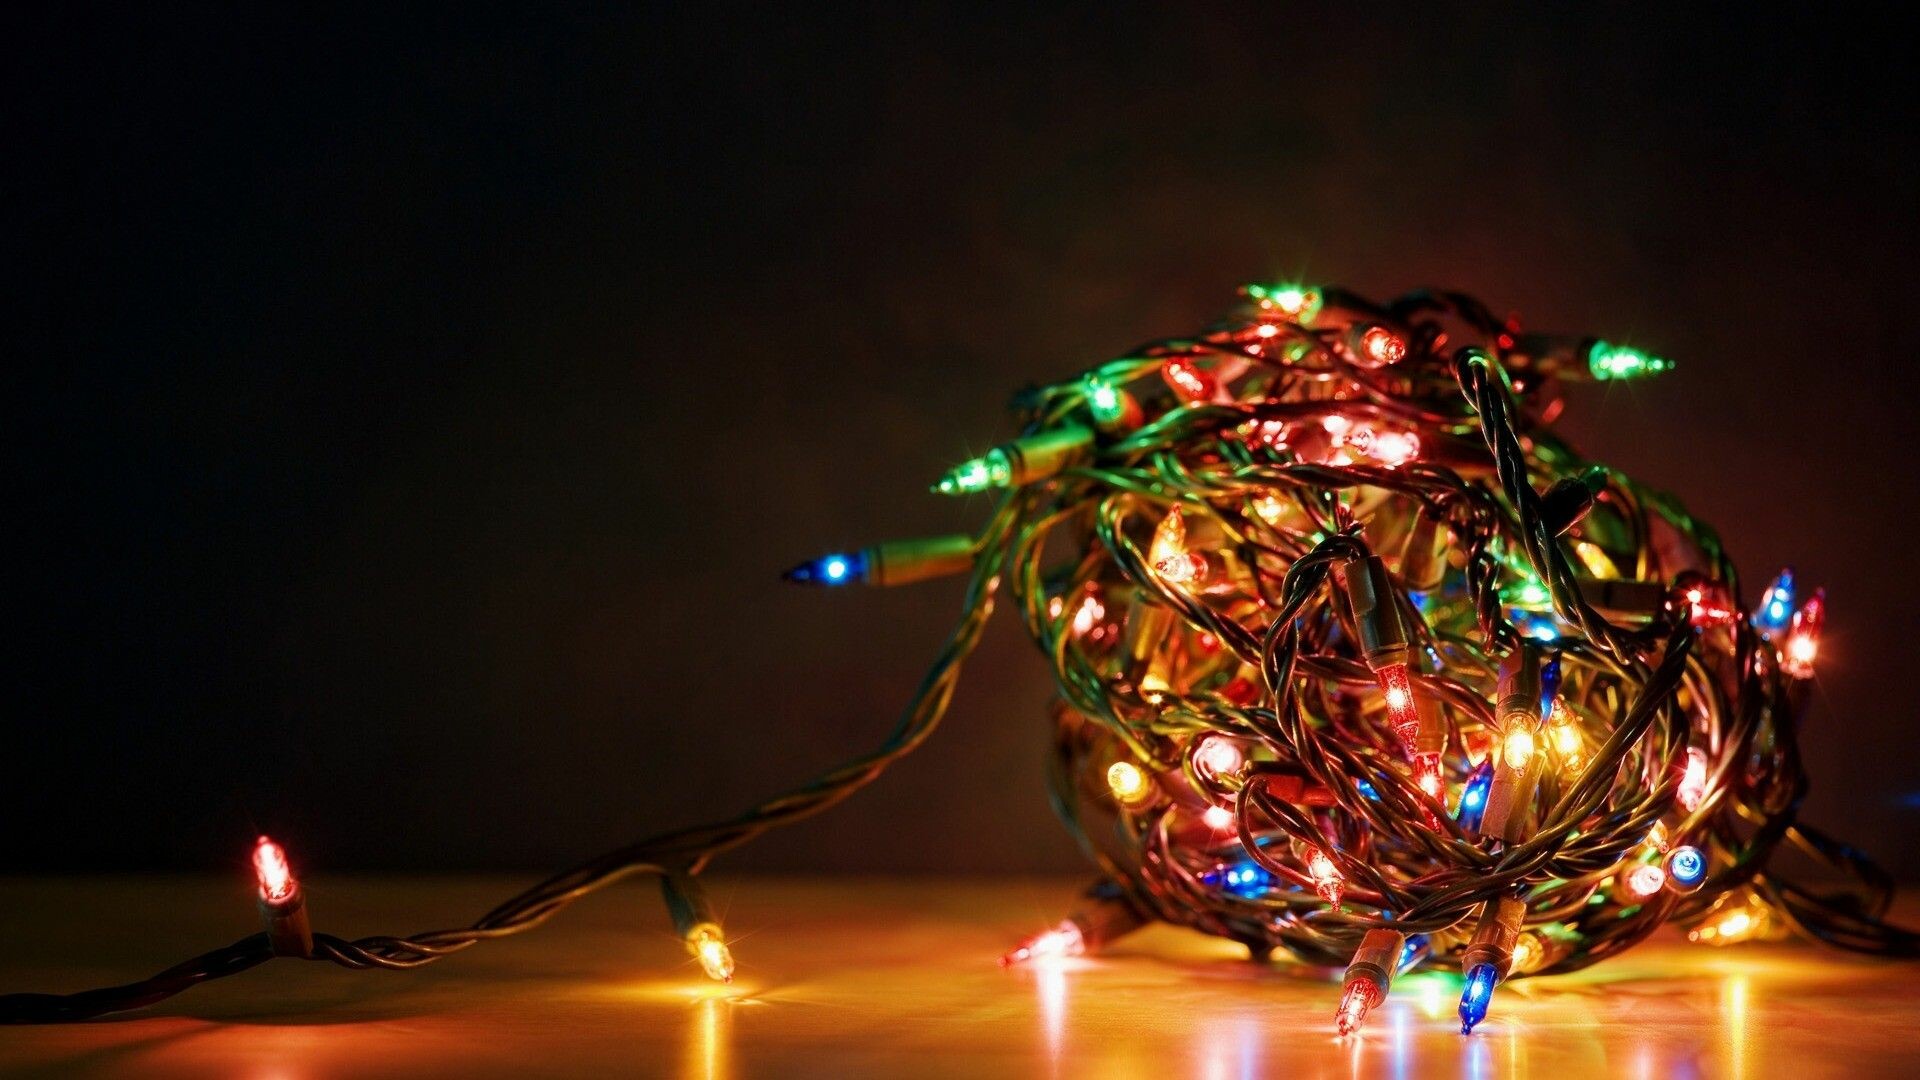 Fairy Lights: General Electric was the first company to sell pre-wired Christmas lights. 1920x1080 Full HD Background.